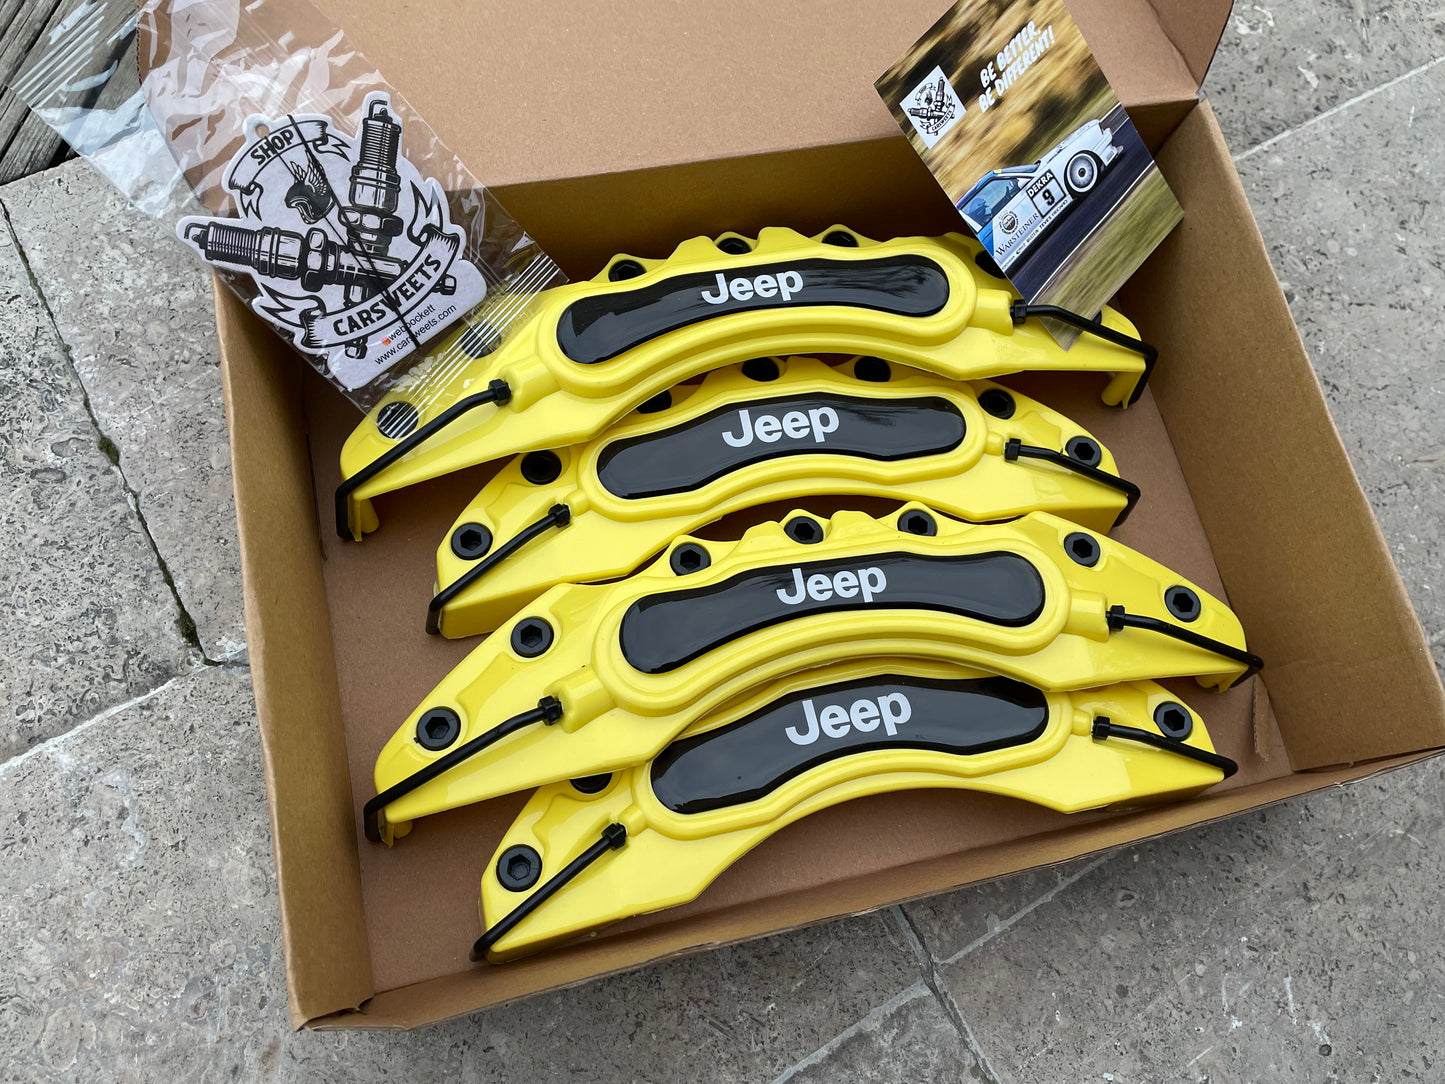 4pc Brake Caliper Covers for Jeep Yellow